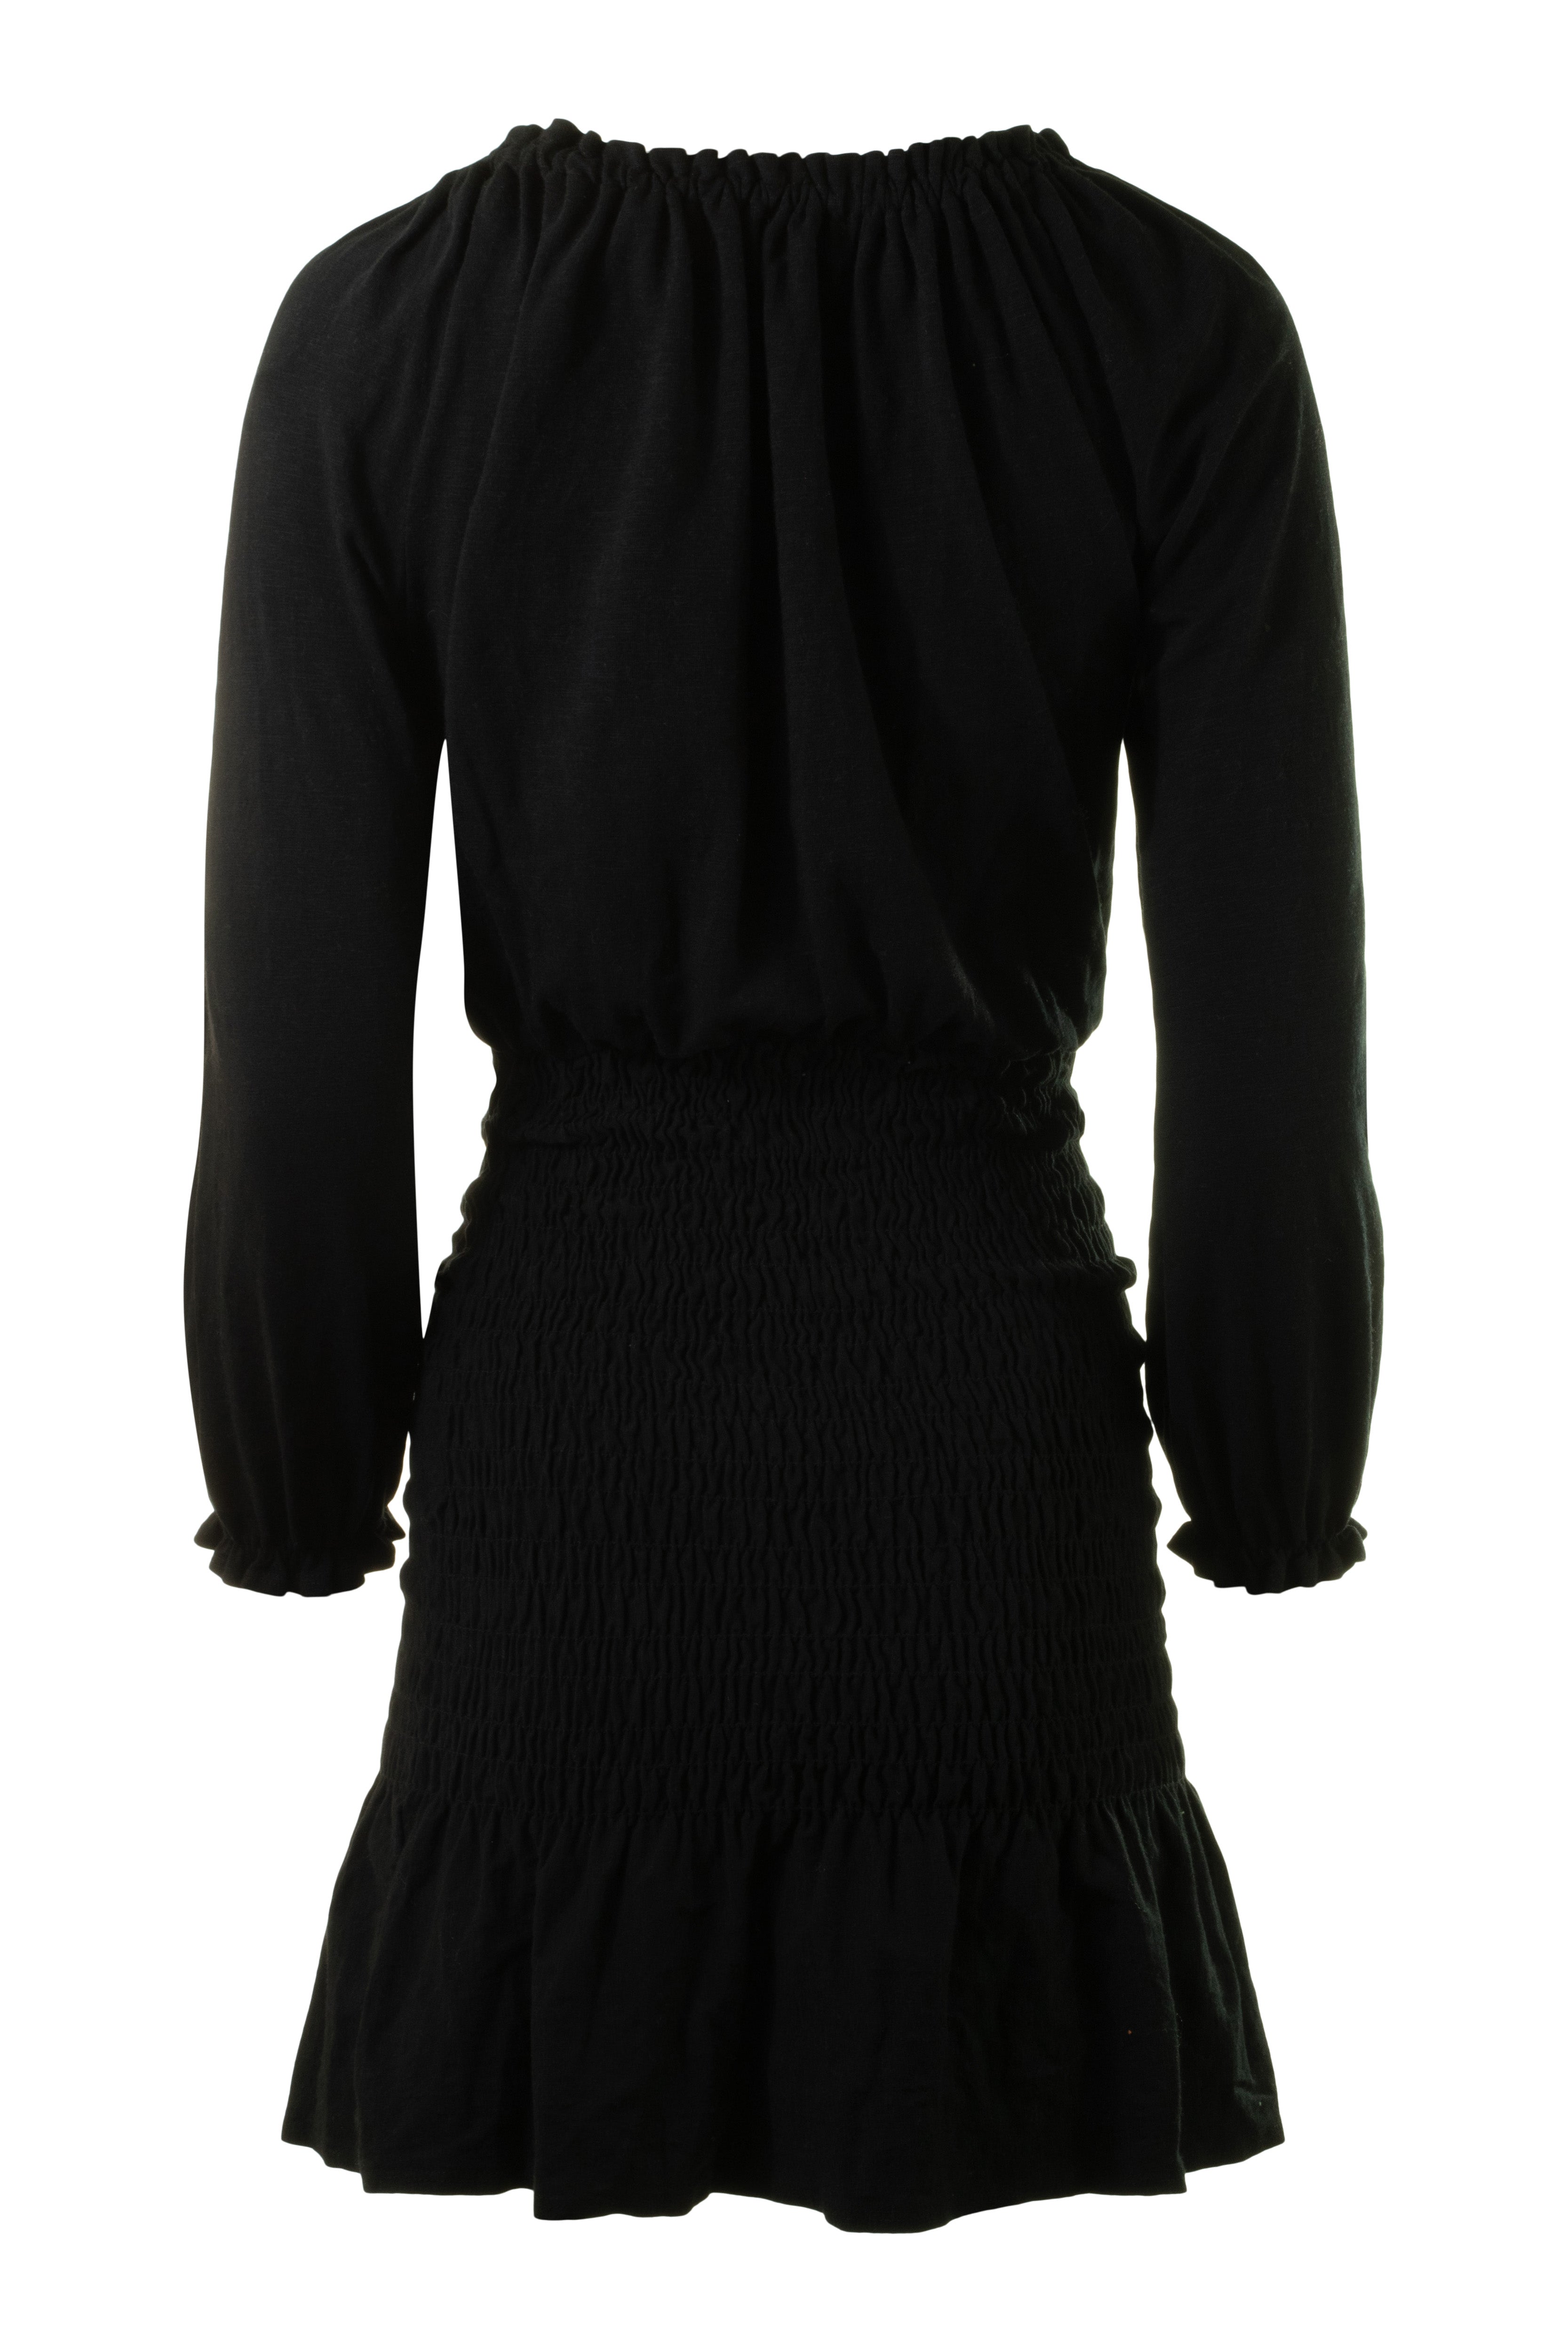 Sundry Smocked Dress with Ruffles in Black